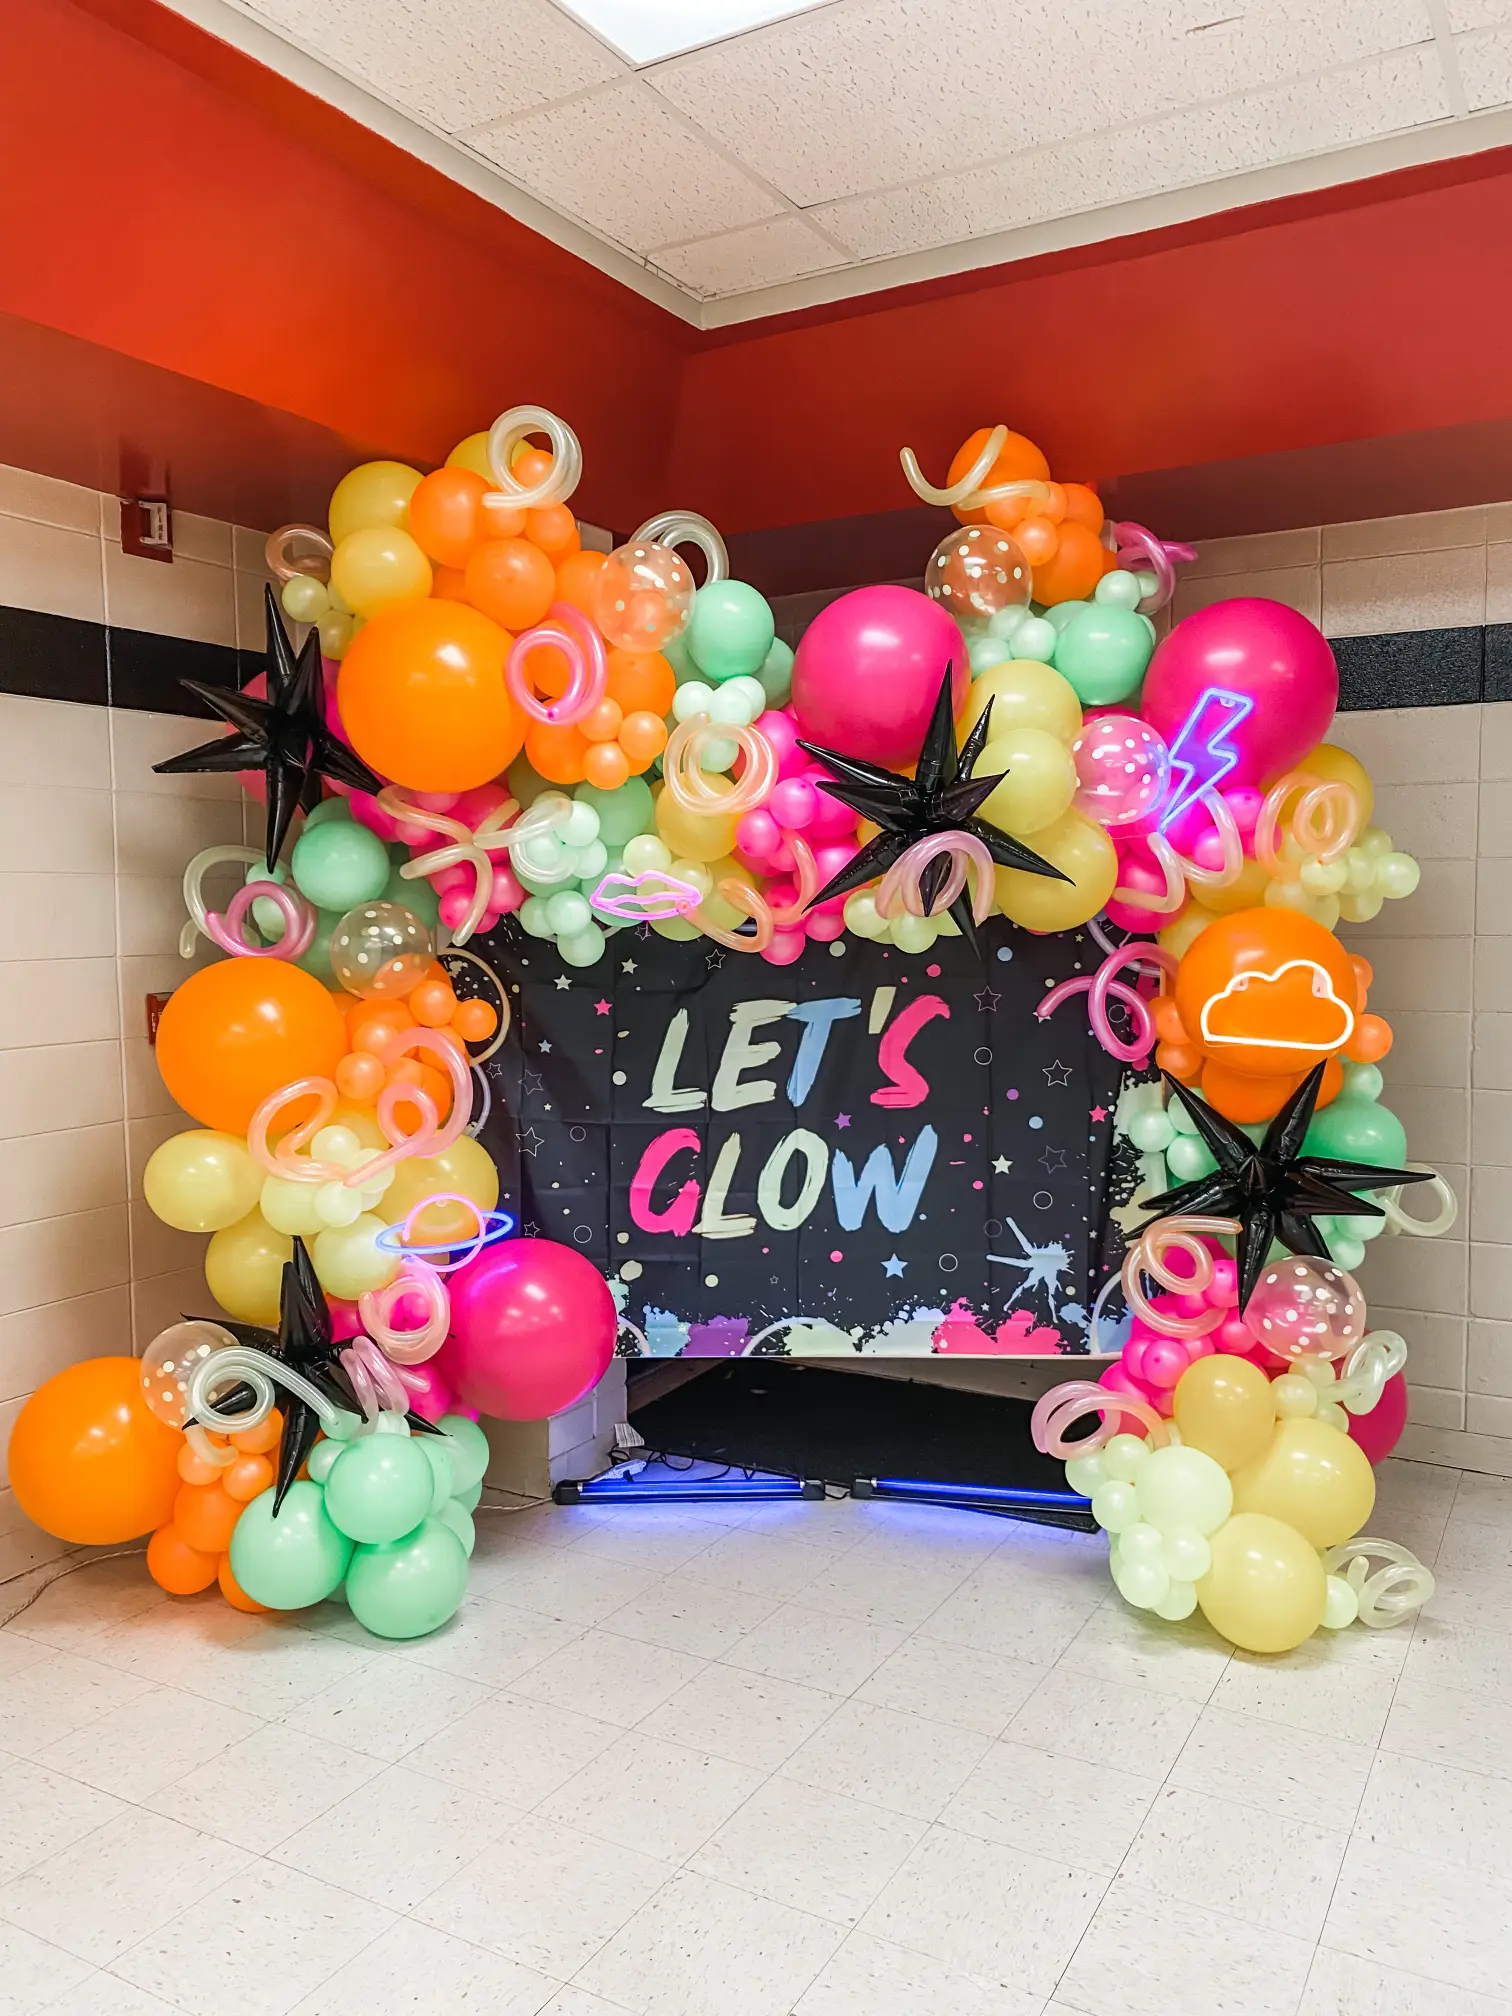 Peach Party Decorations: How To Throw A Peach Party! - NeonGrand